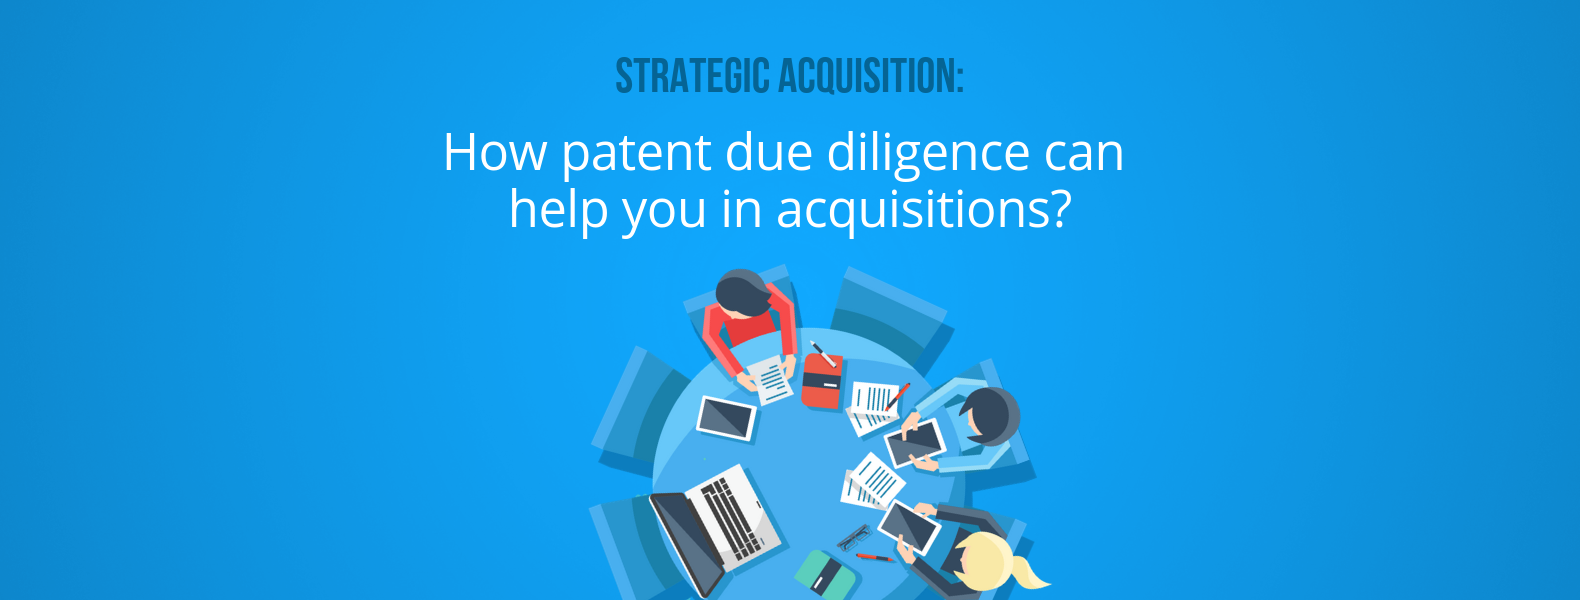 patent due diligence